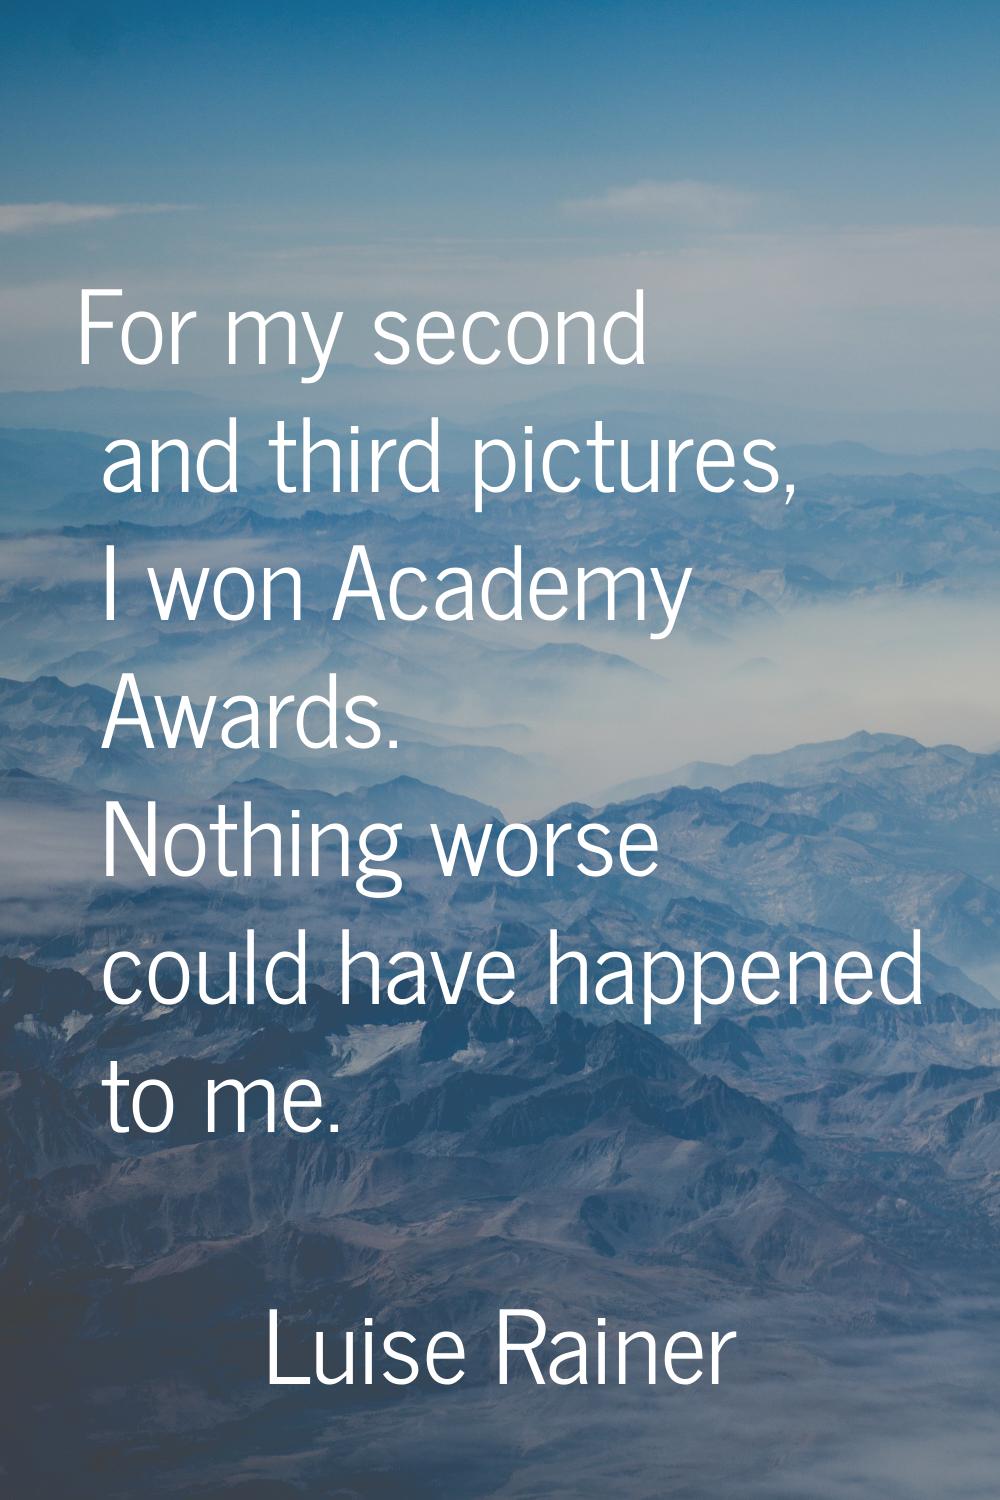 For my second and third pictures, I won Academy Awards. Nothing worse could have happened to me.